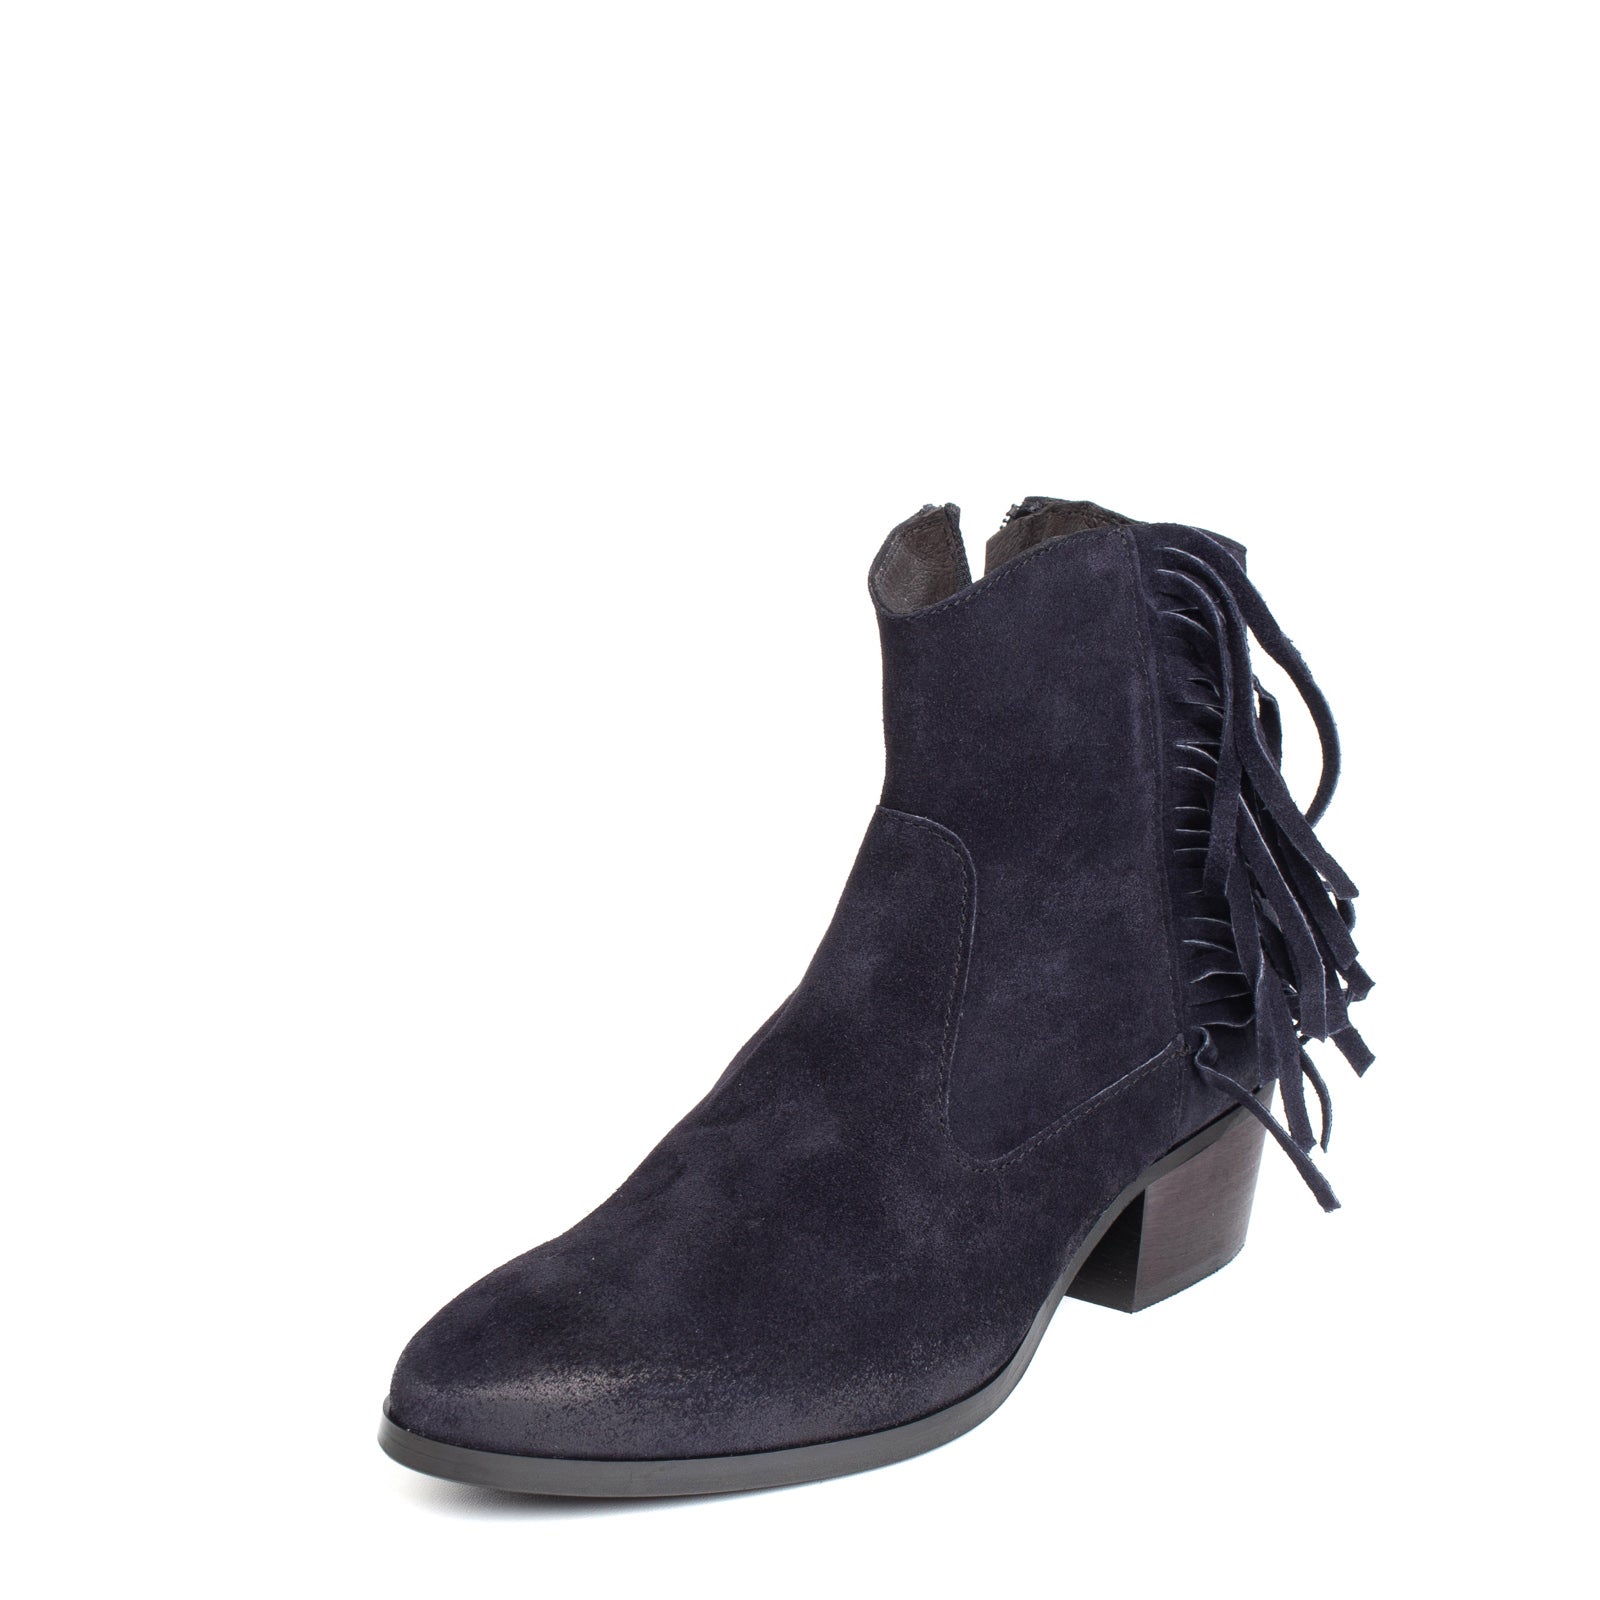 GEORGE J. LOVE Suede Leather Ankle Boots EU 36 UK 3 US 6 Treated Made in Italy gallery main photo